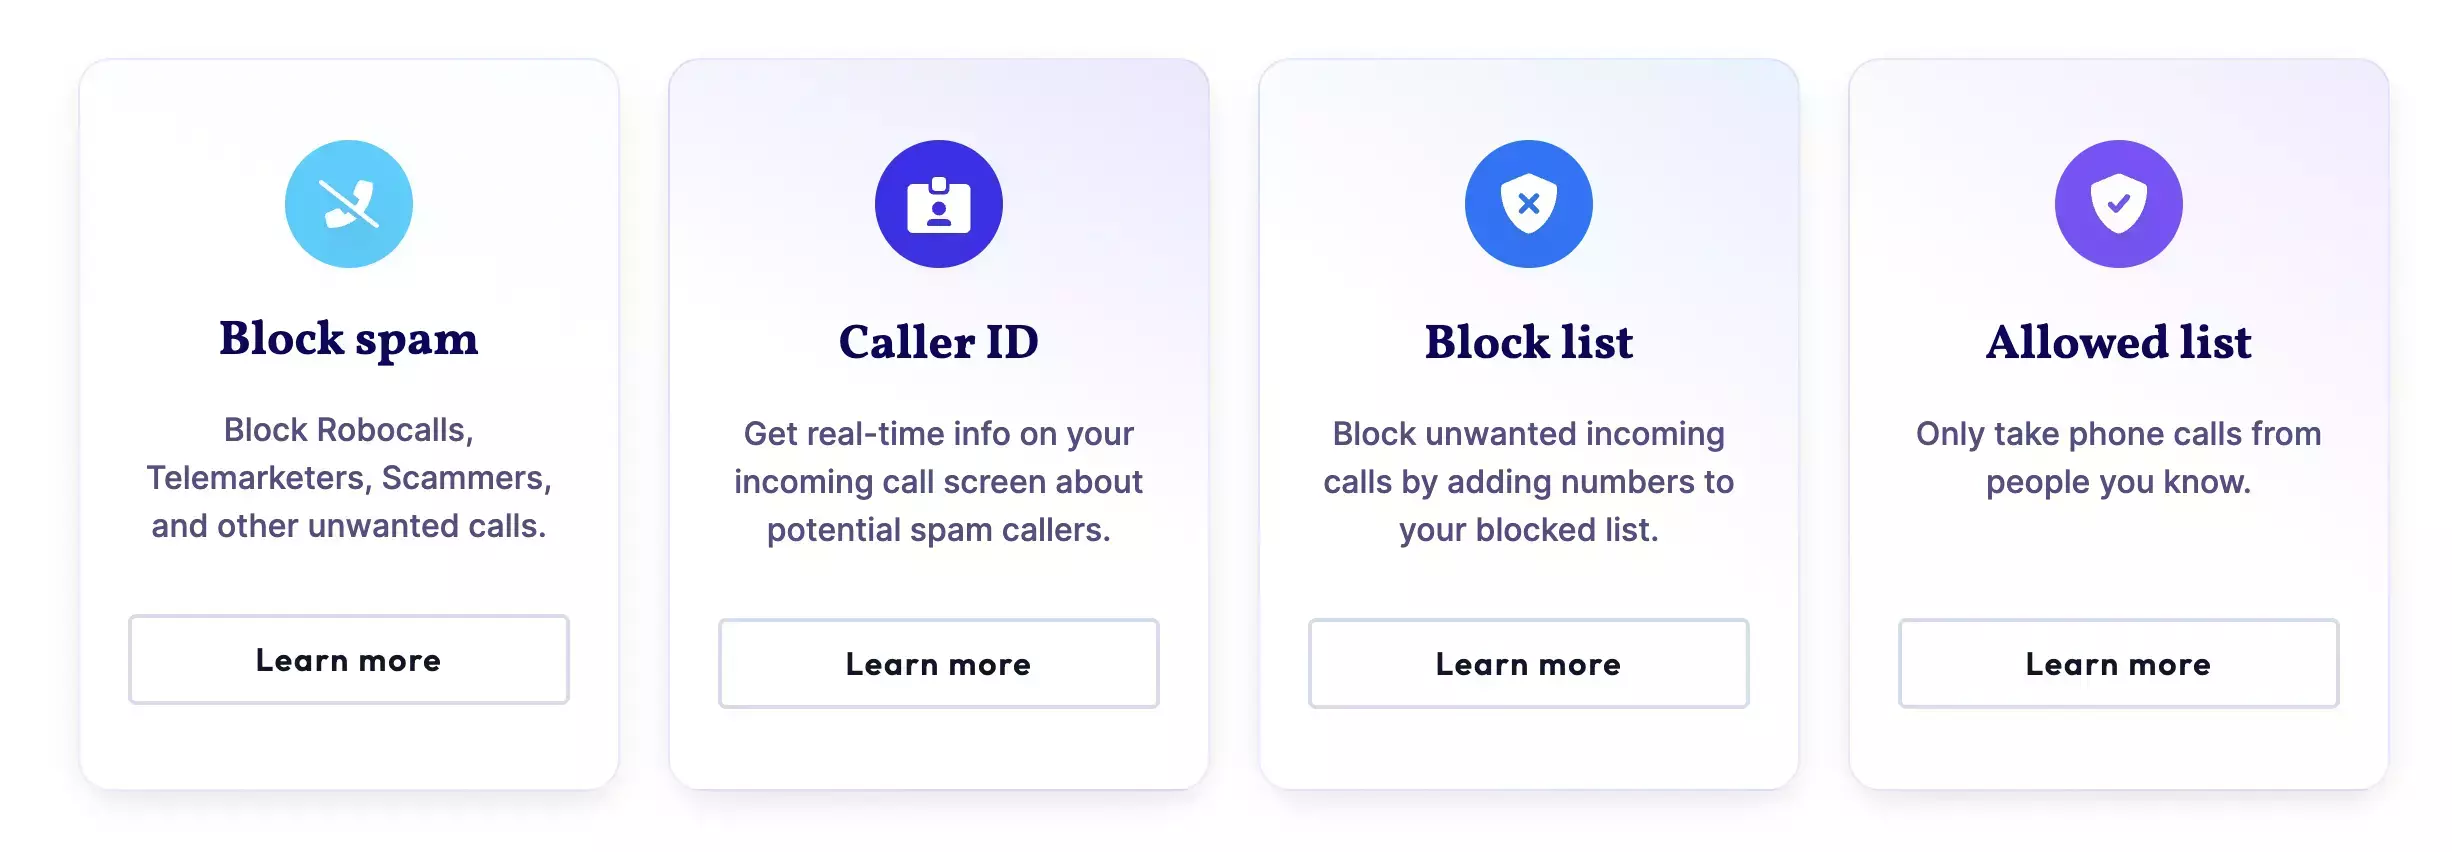 An image of Community Phone business landline spam call blocking features